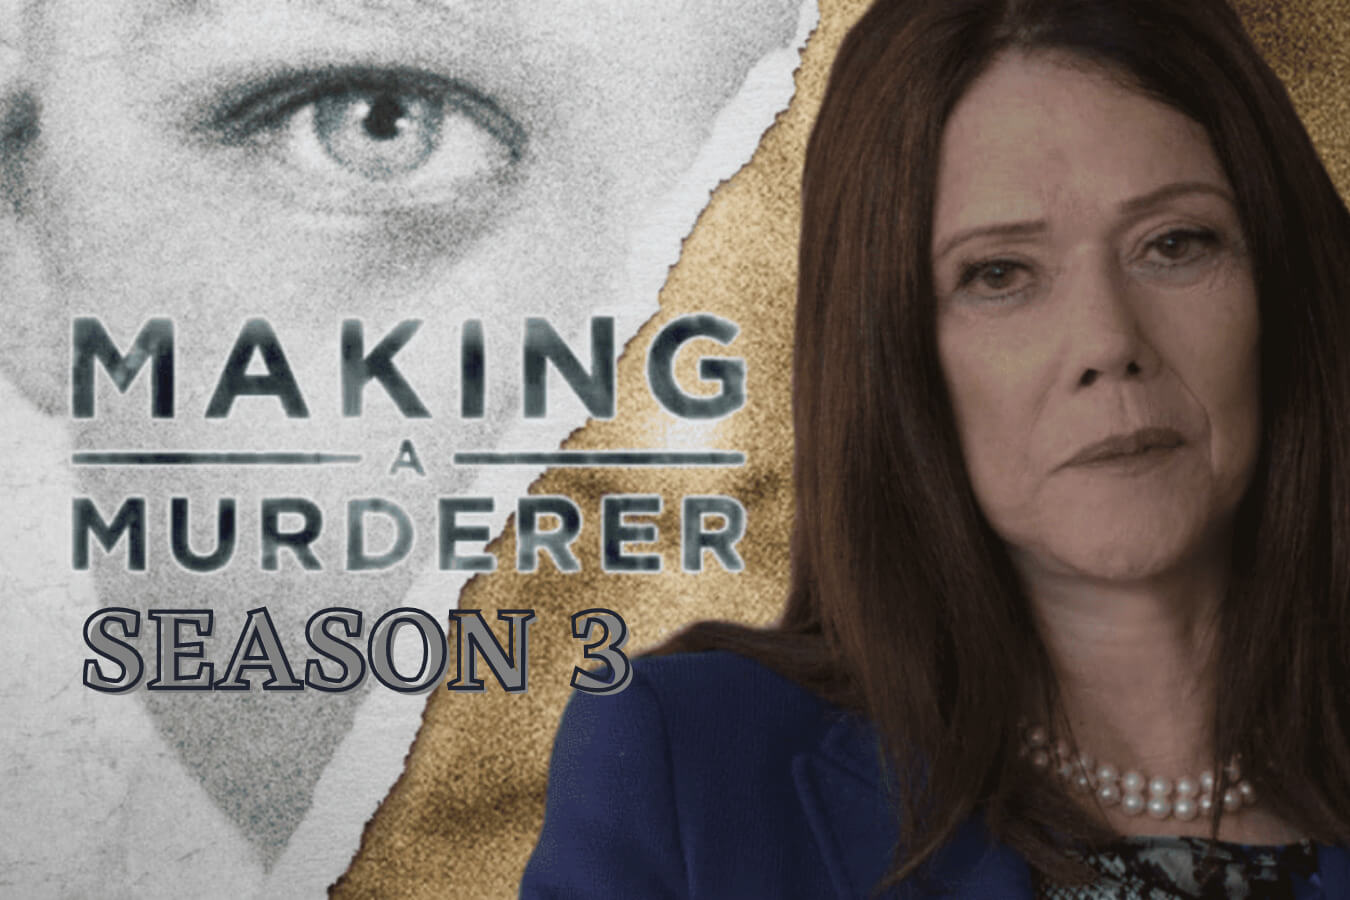 Will there be any Updates on the Making A Murderer season 3 Trailer?